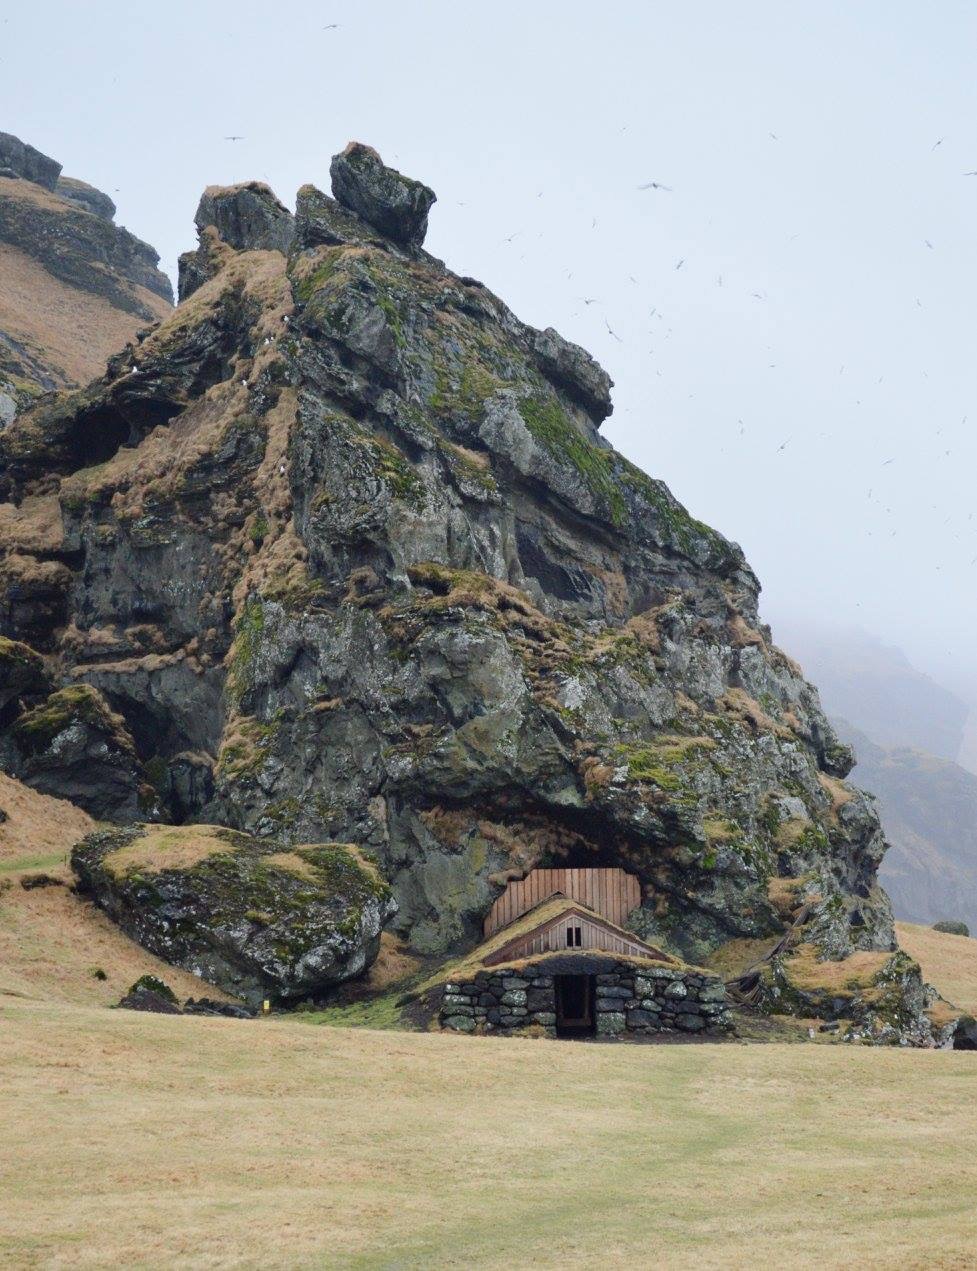 Awesome picture of a house that is under an enormous rock on a mountain side.